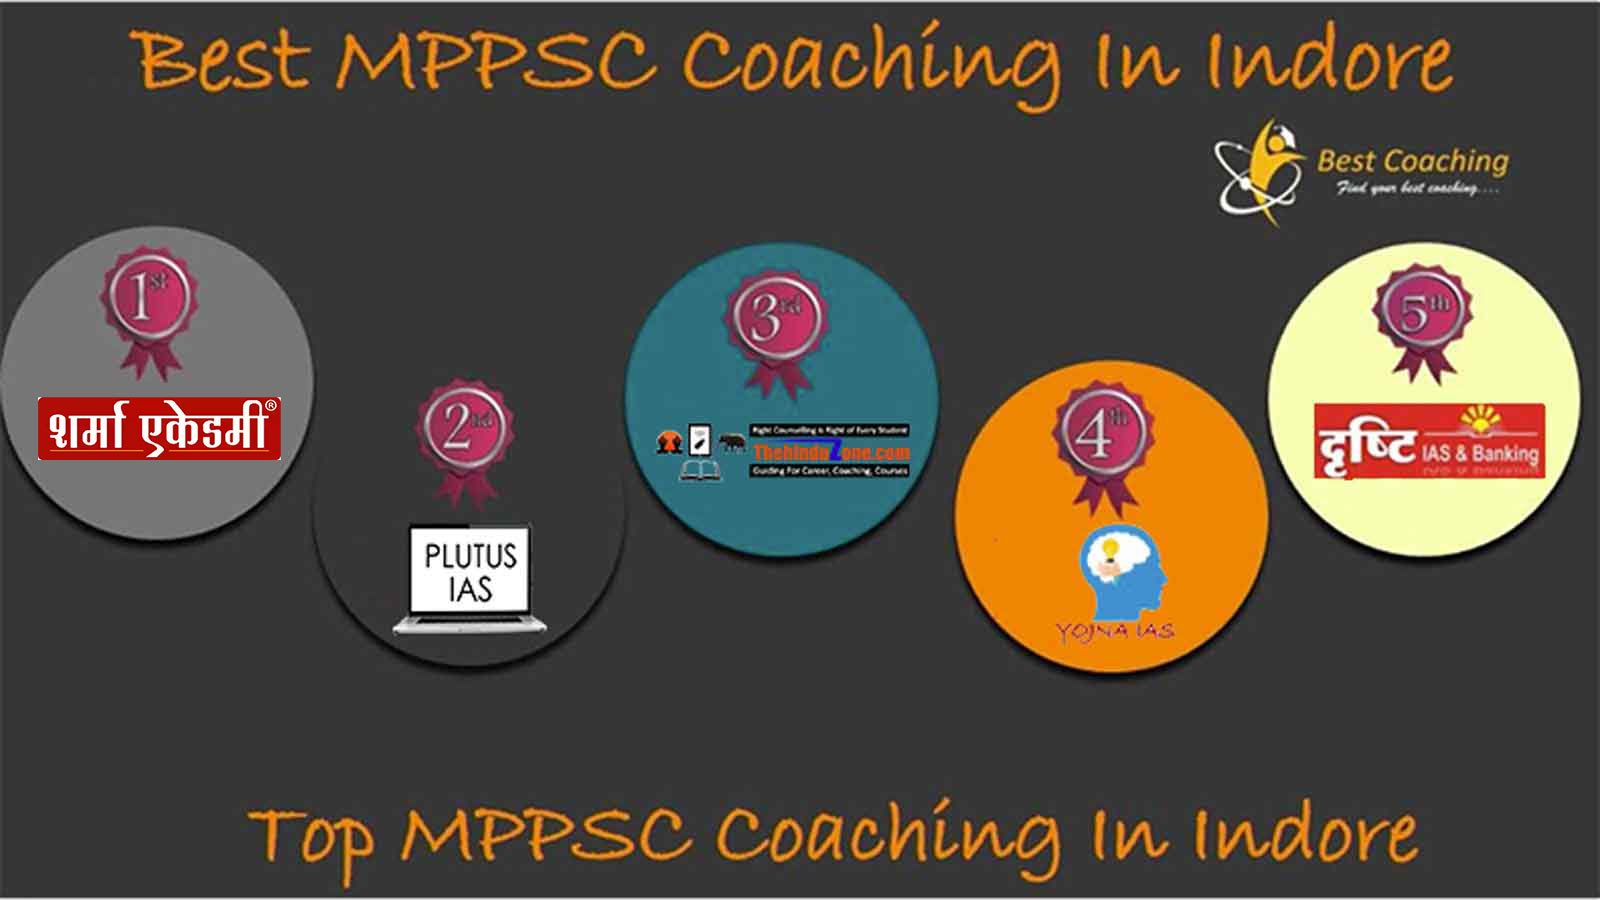 Best MPPSC Coachings in Indore